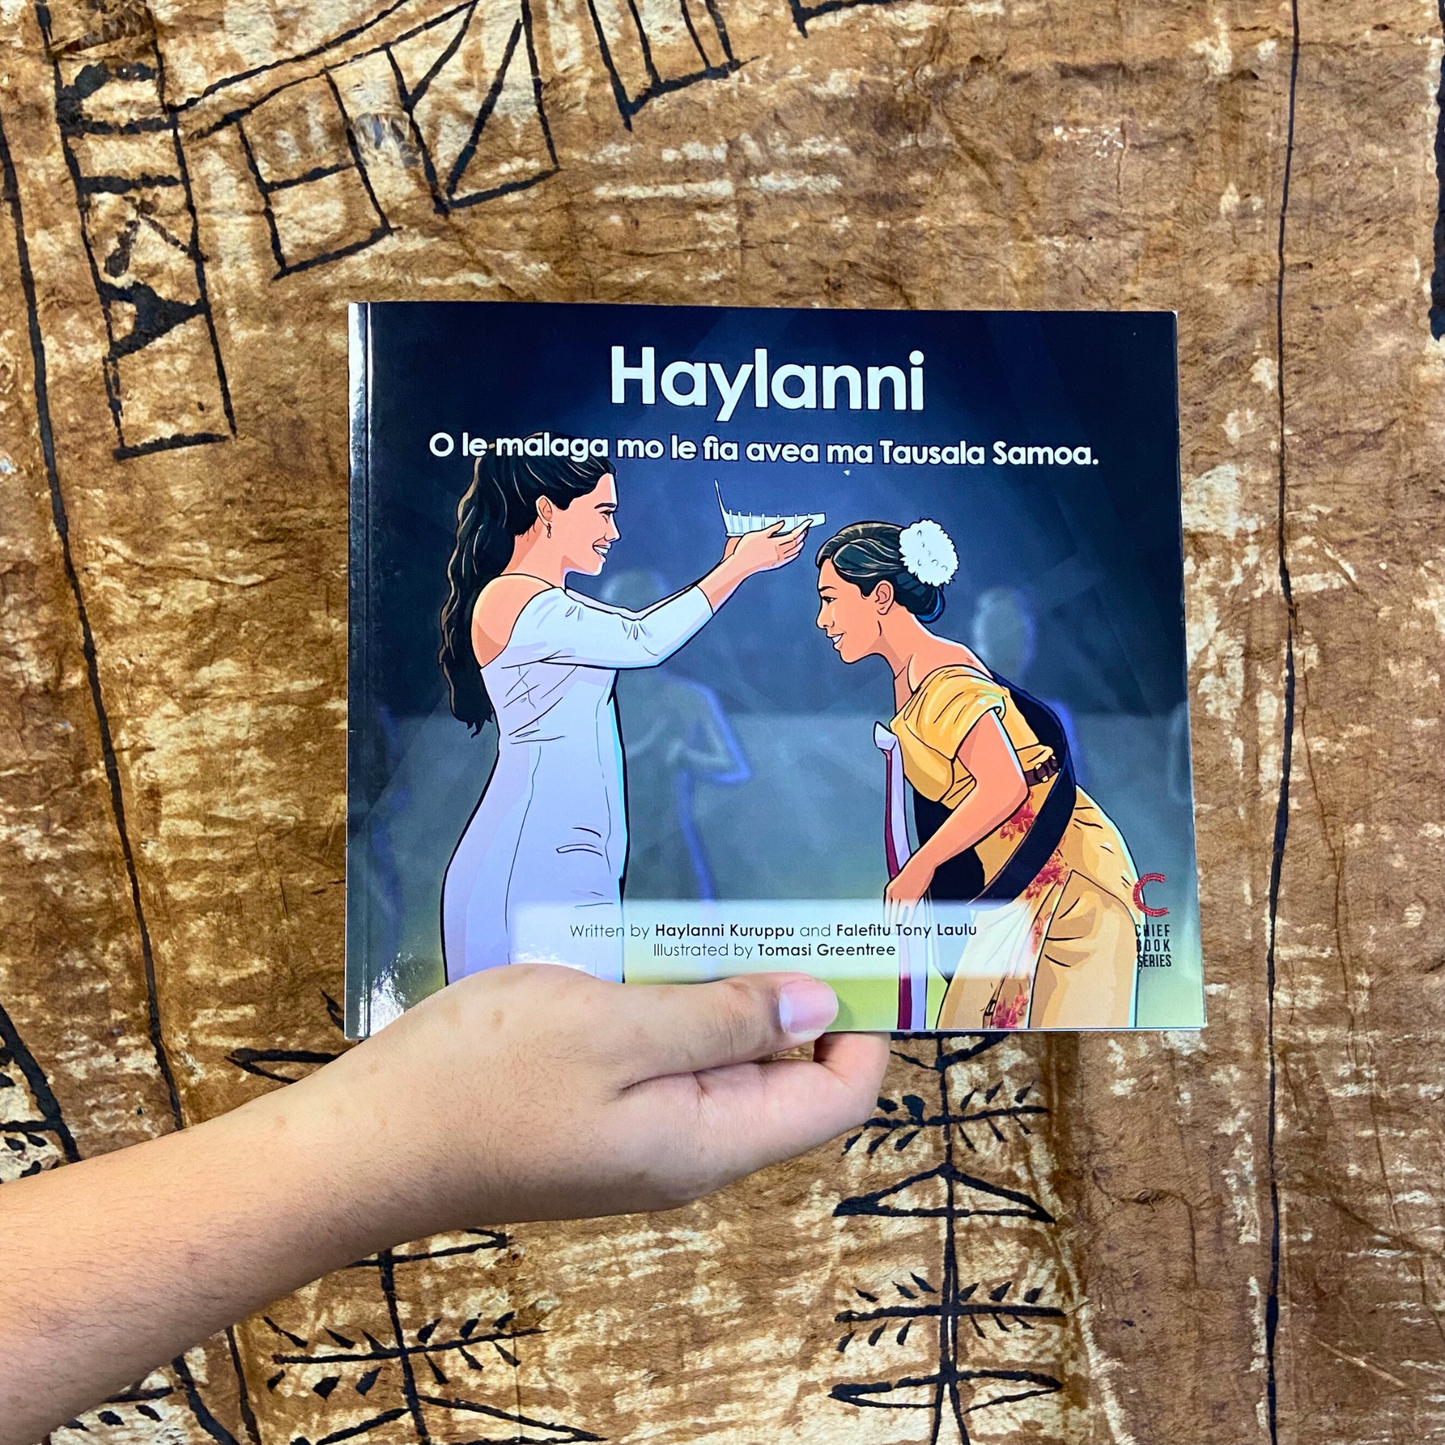 A hand model holding a bilingual Samoan children's book titled "Haylanni: The Journey to Miss Samoa". The book is an illustration of a Fonoifafo Miss Samoa 2019-2021 crowning Haylanni as the new reigning Miss Samoa 2022-2023.